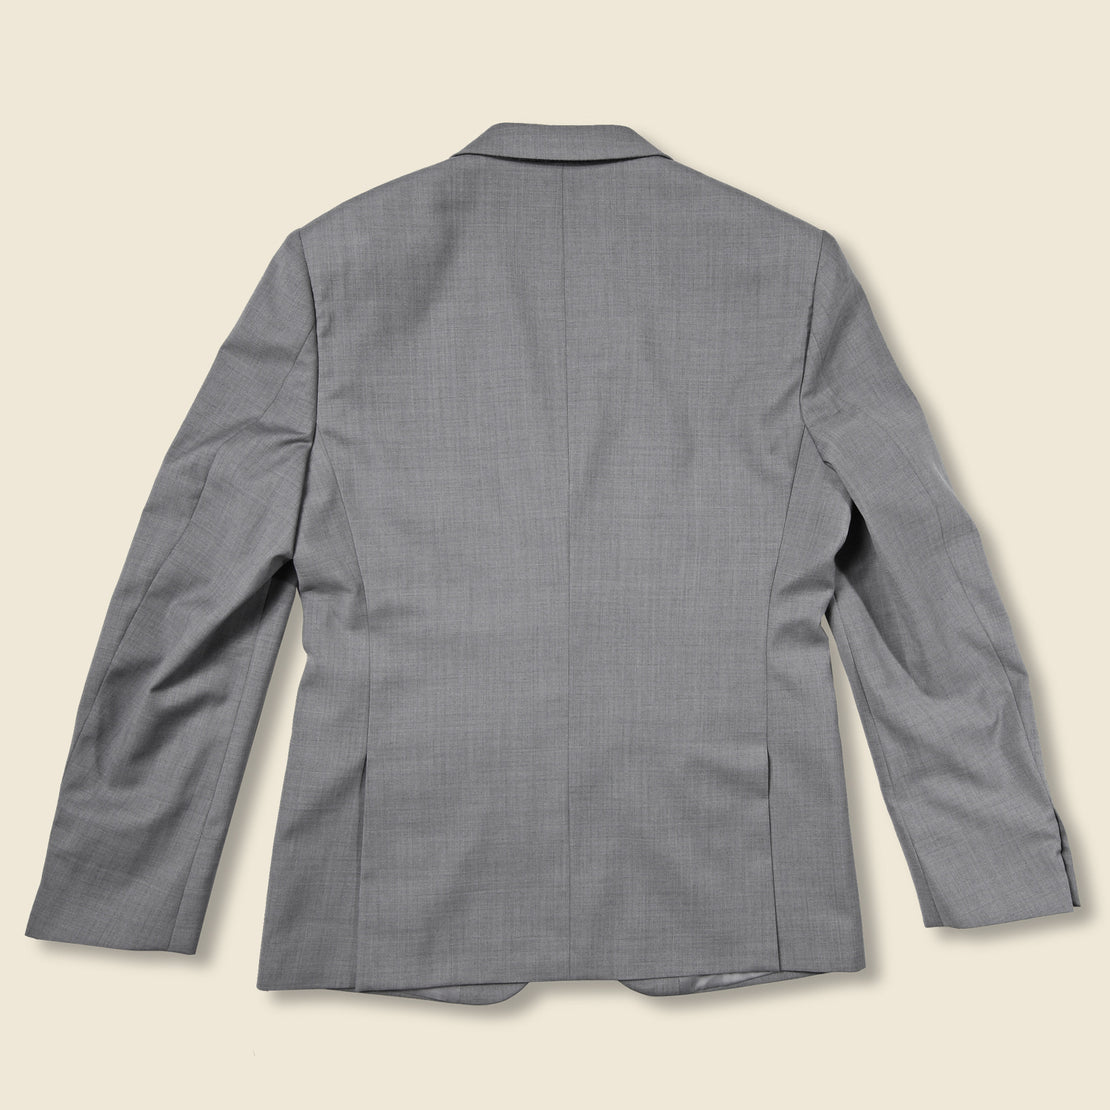 Suit Jacket - Grey - General Assembly - STAG Provisions - Suiting - Sport Coat